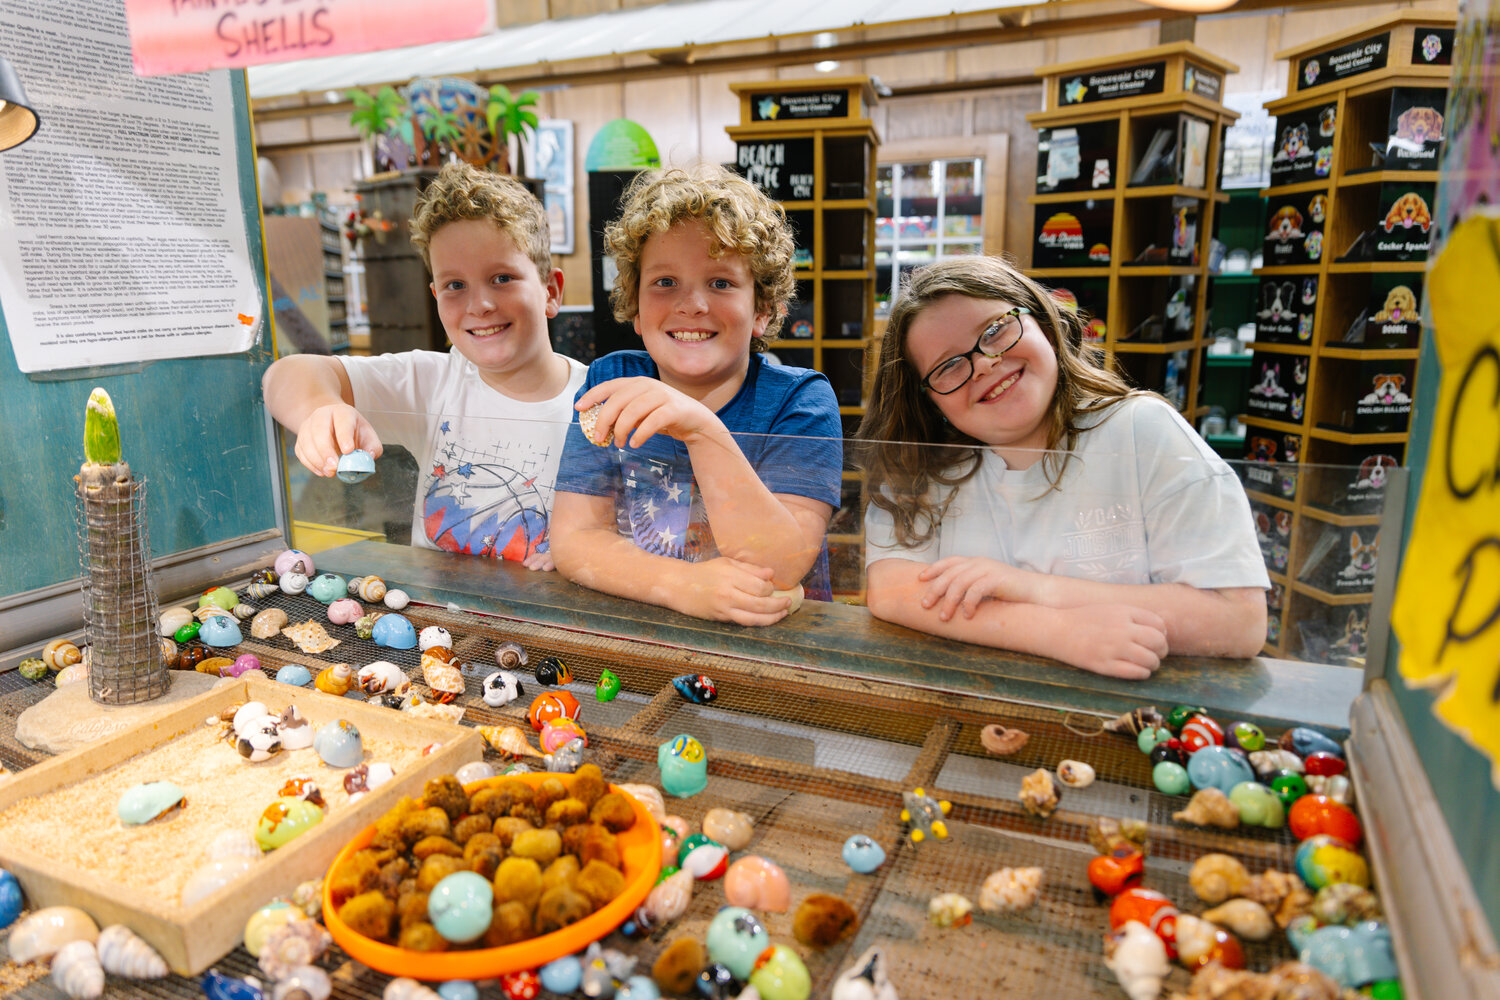 Kids at Souvenir City holding the land hermit crabs while in store. These land hermit crabs can eat human food, if they do not have a large amount of salt or spicy seasoning.